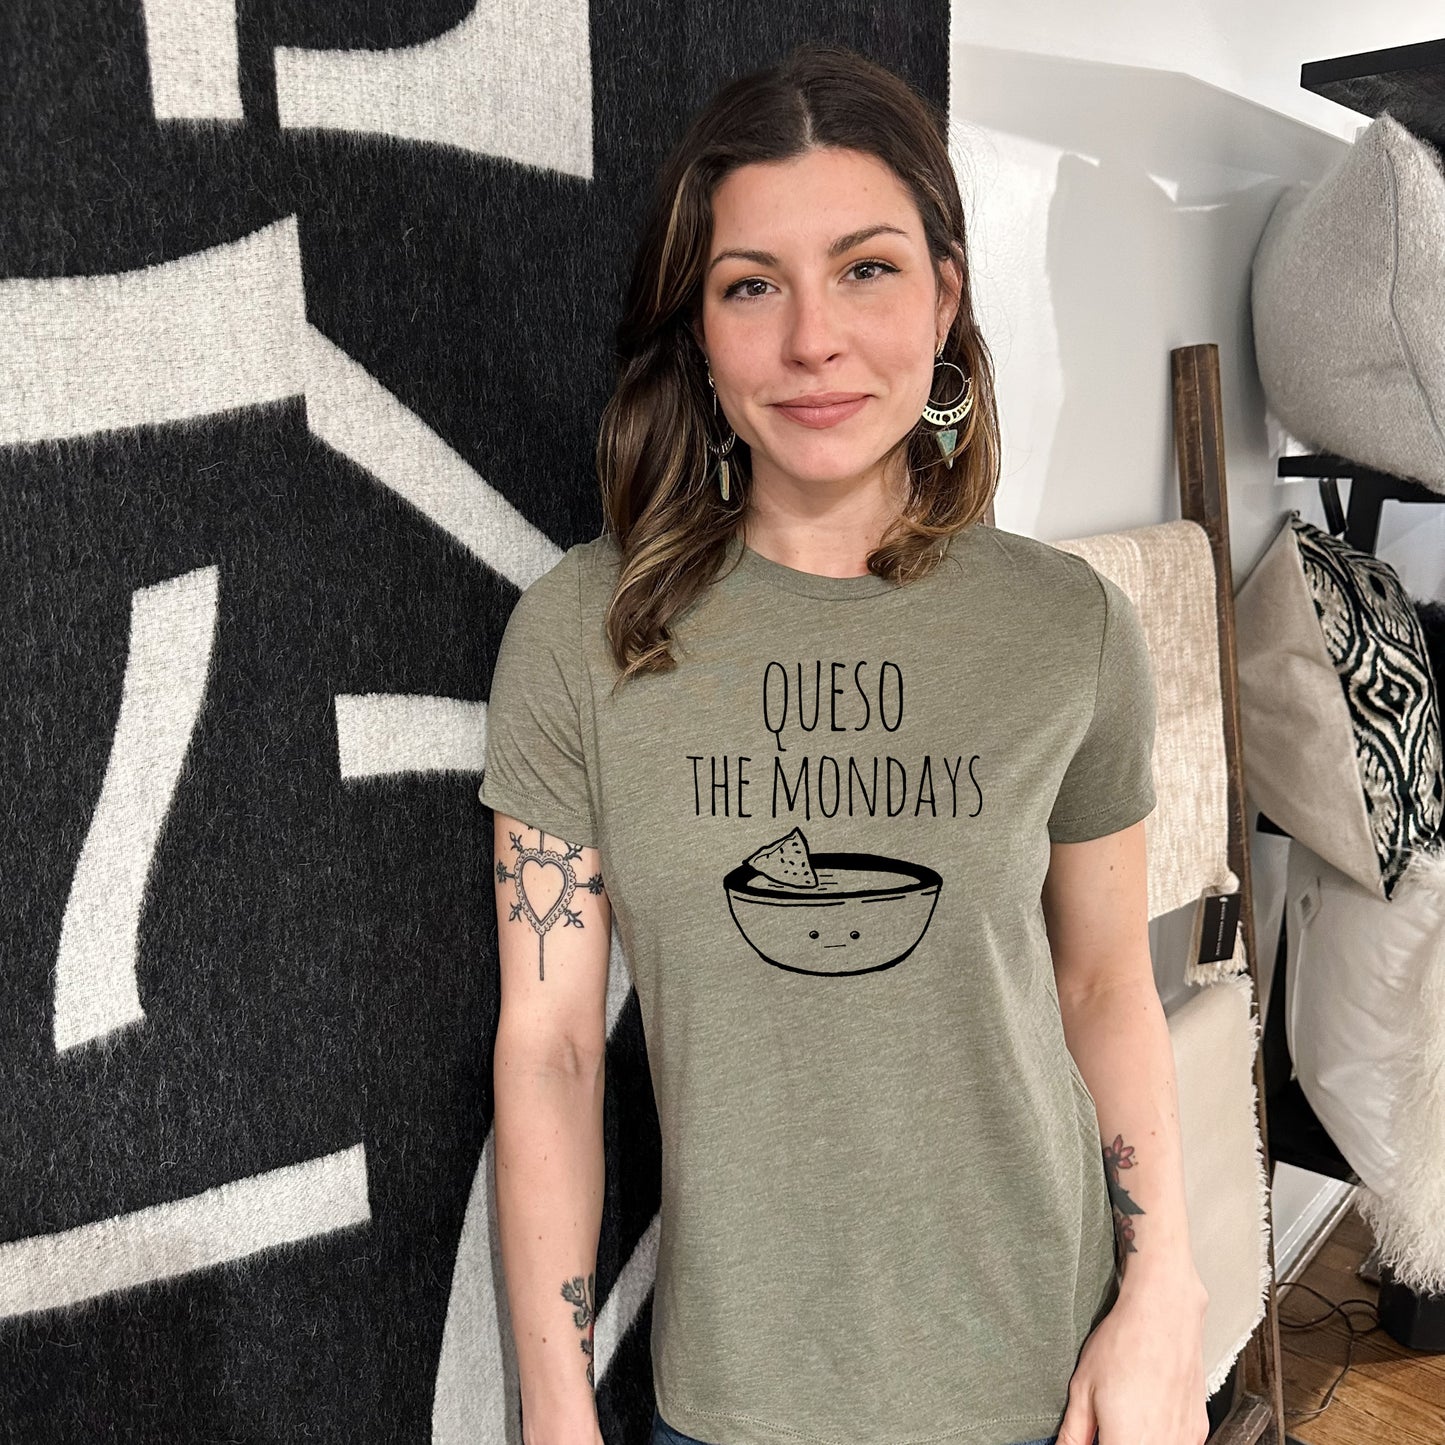 Queso The Mondays (Tacos) - Women's Crew Tee - Olive or Dusty Blue